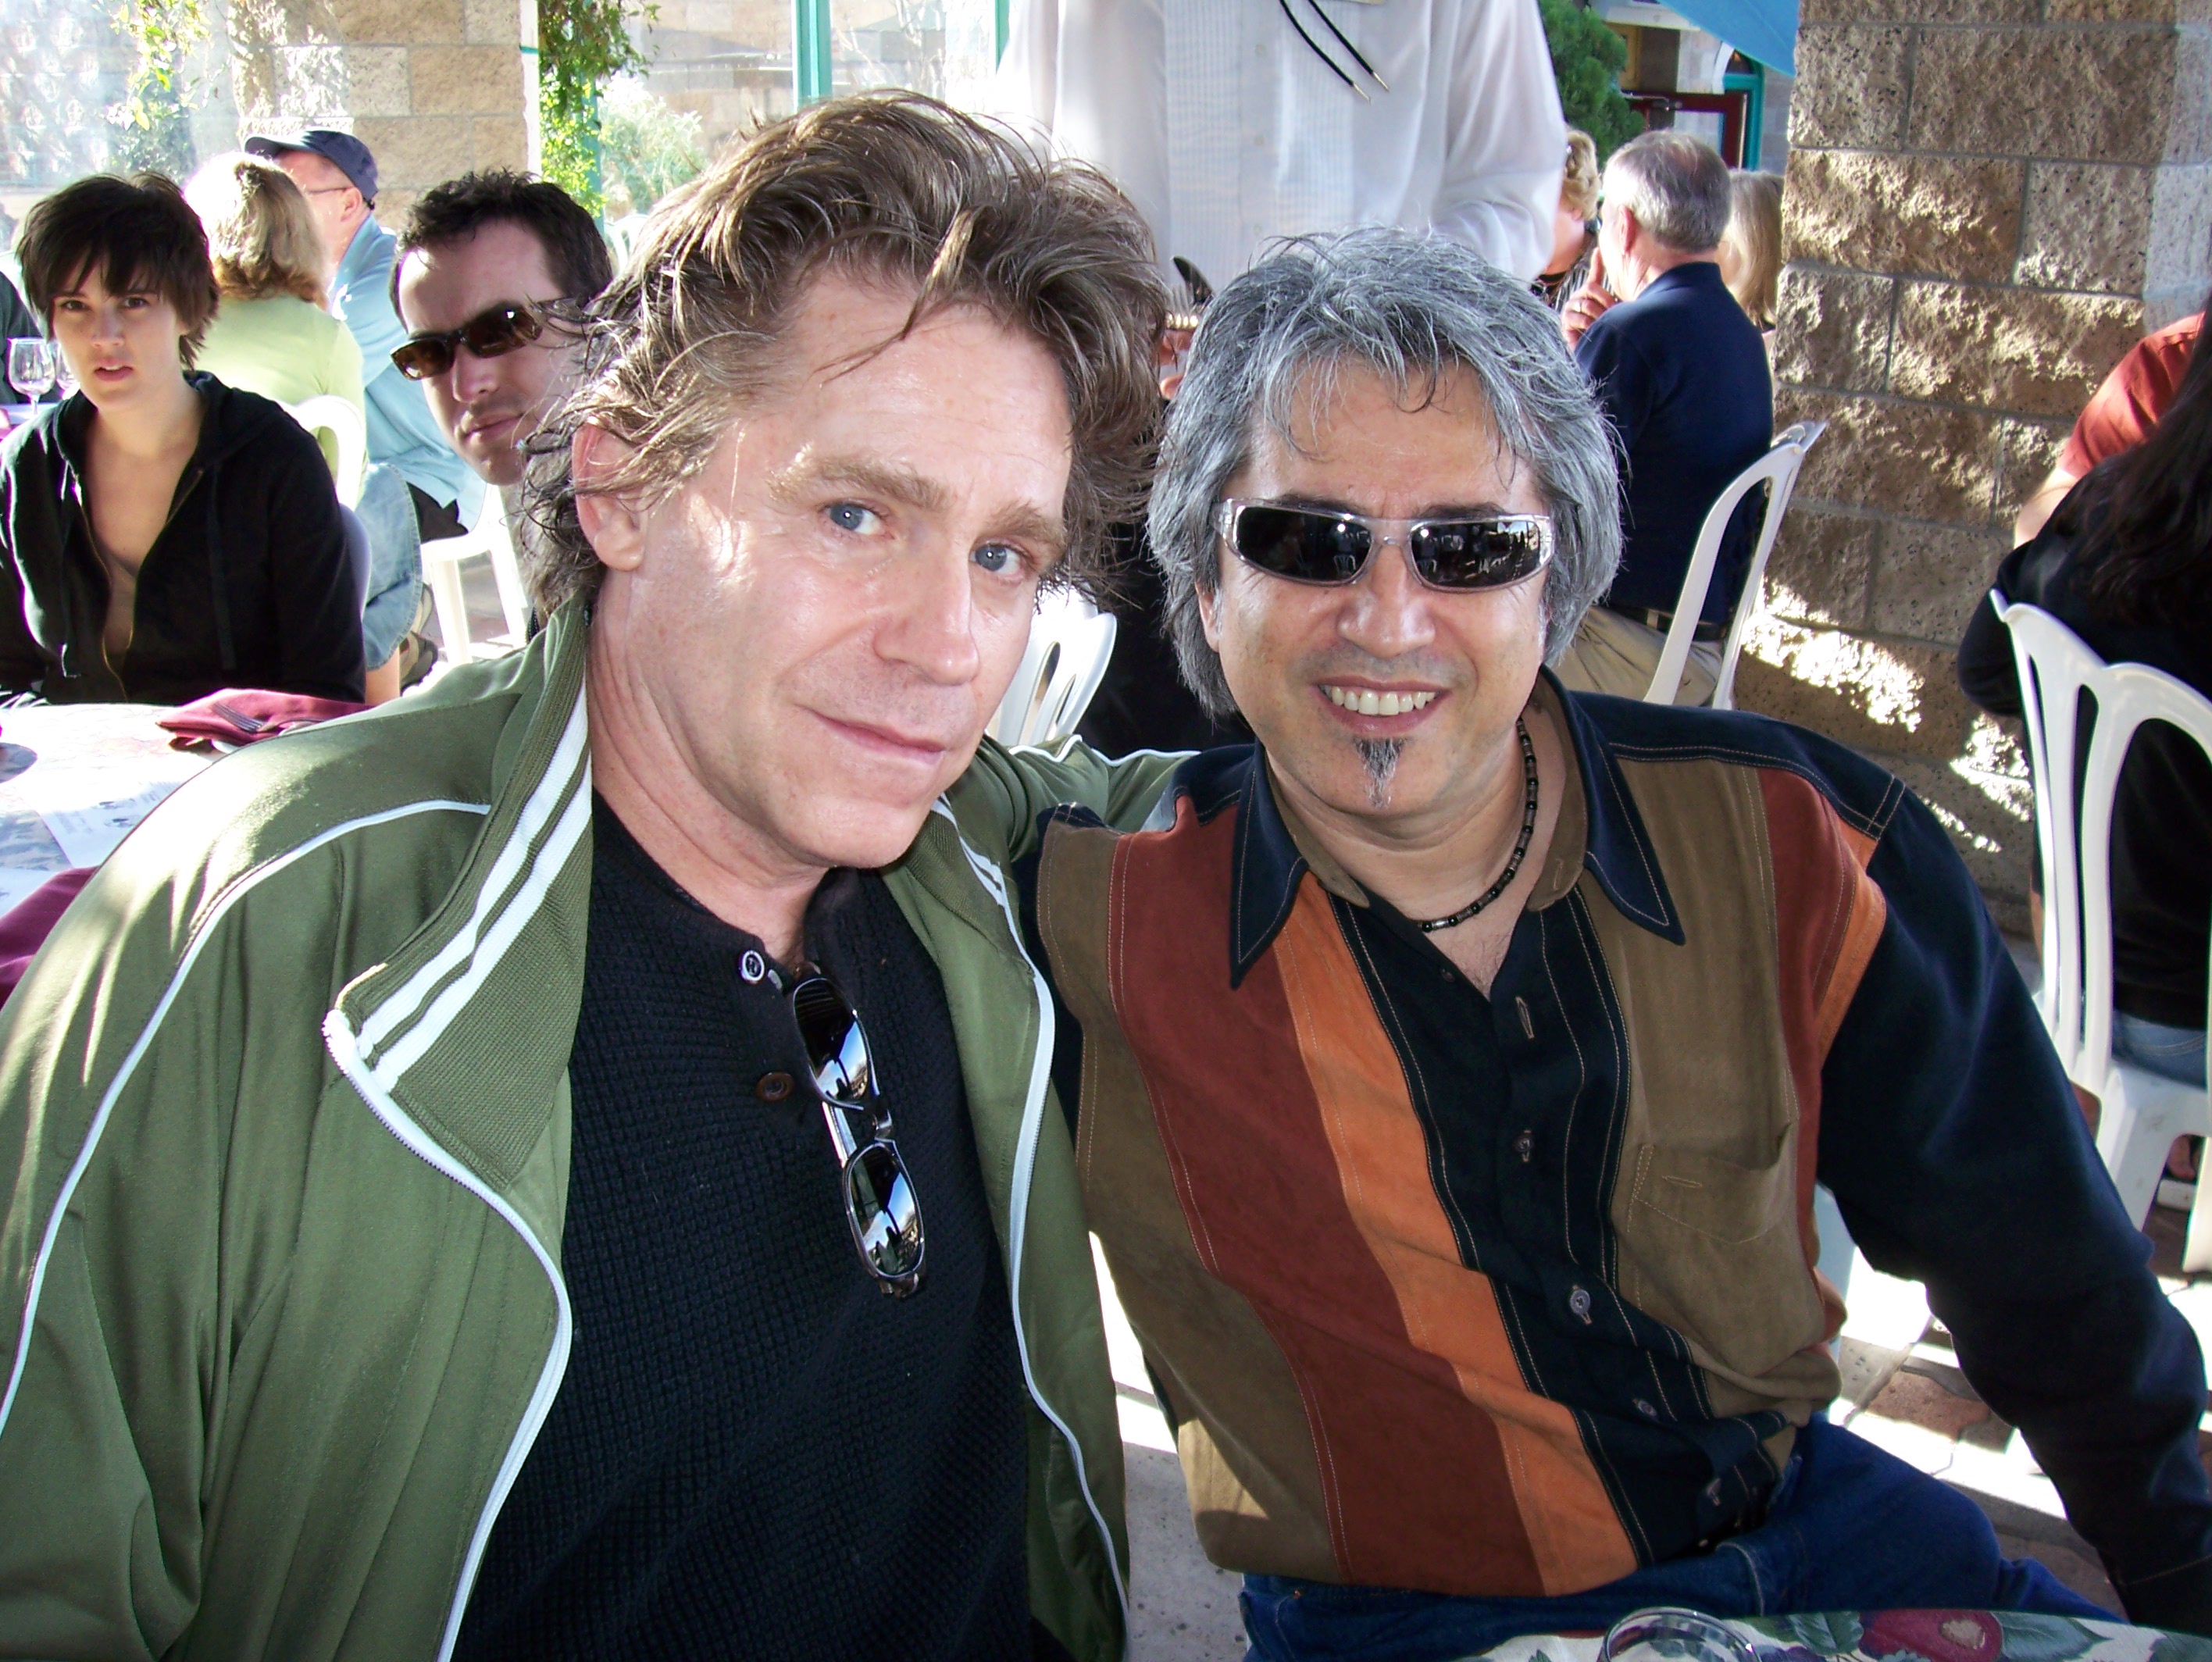 Jeff Conaway and Boris Acosta at a winery in Temecula.